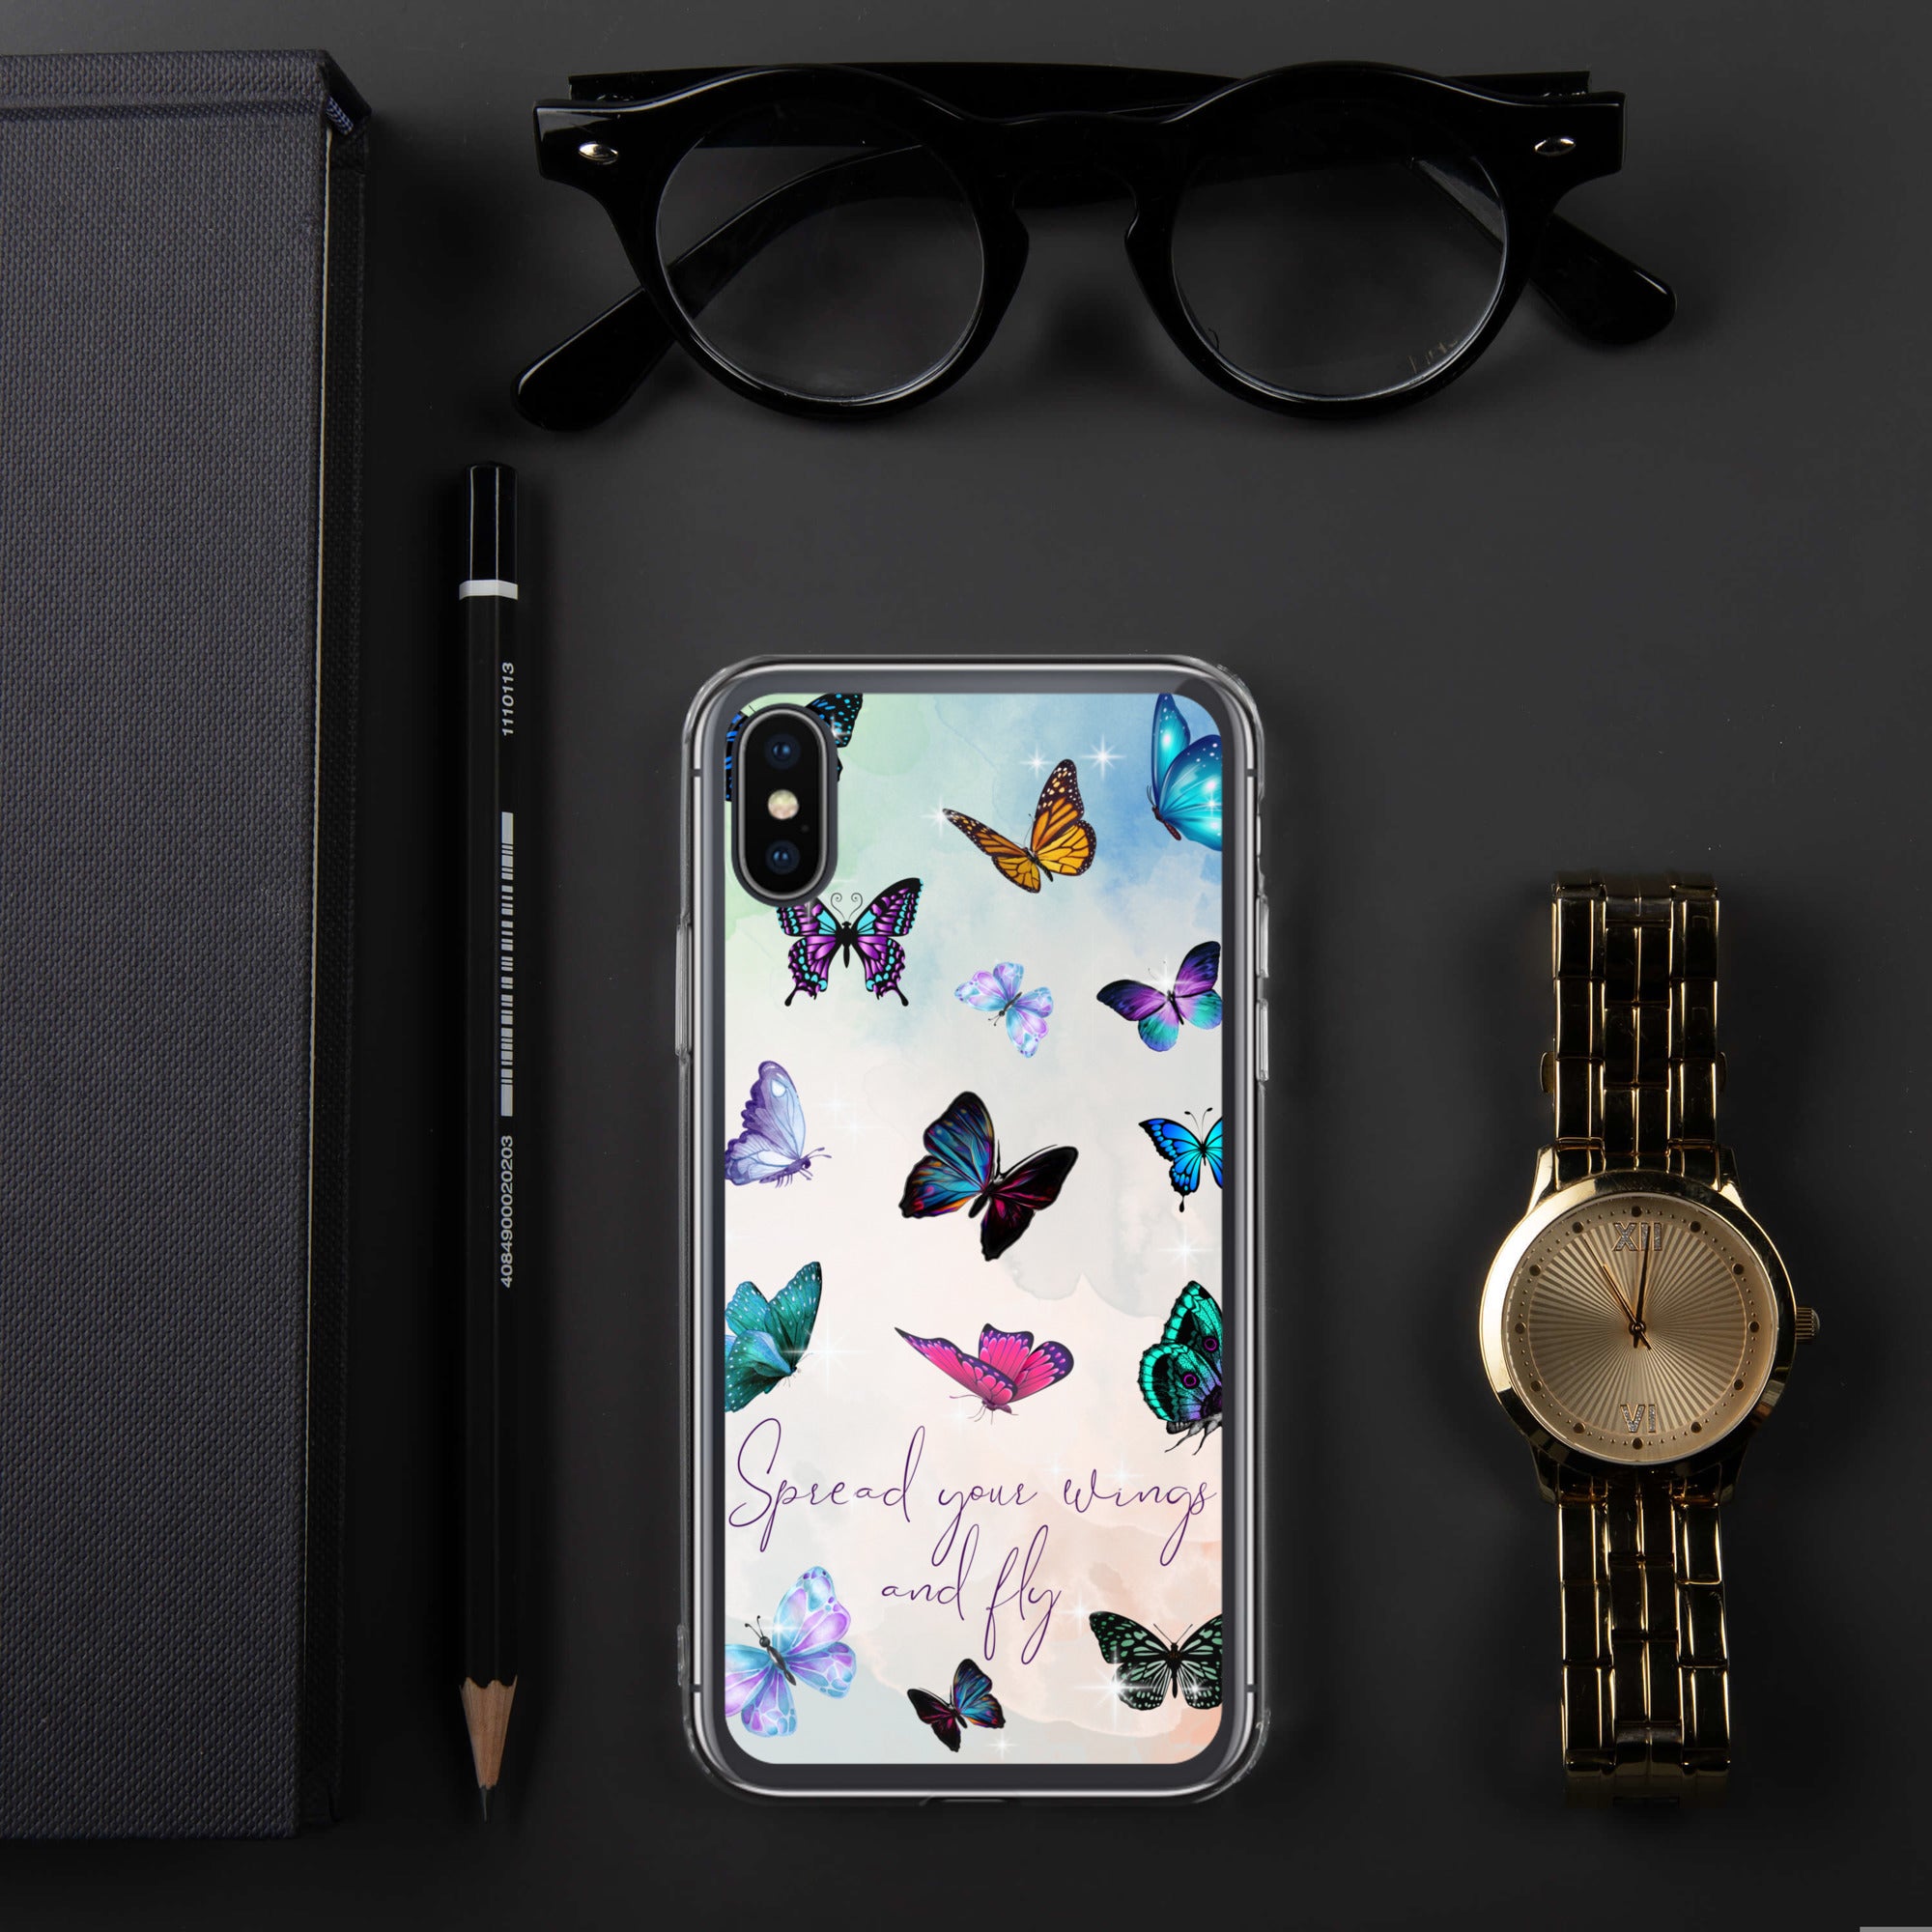 Butterfly Phone Case, Fashion Design Phone Case, Soft Silicone Case for iPhone 13 Case, iPhone 12 Case, iPhone 11 Case, iPhone Case Gift